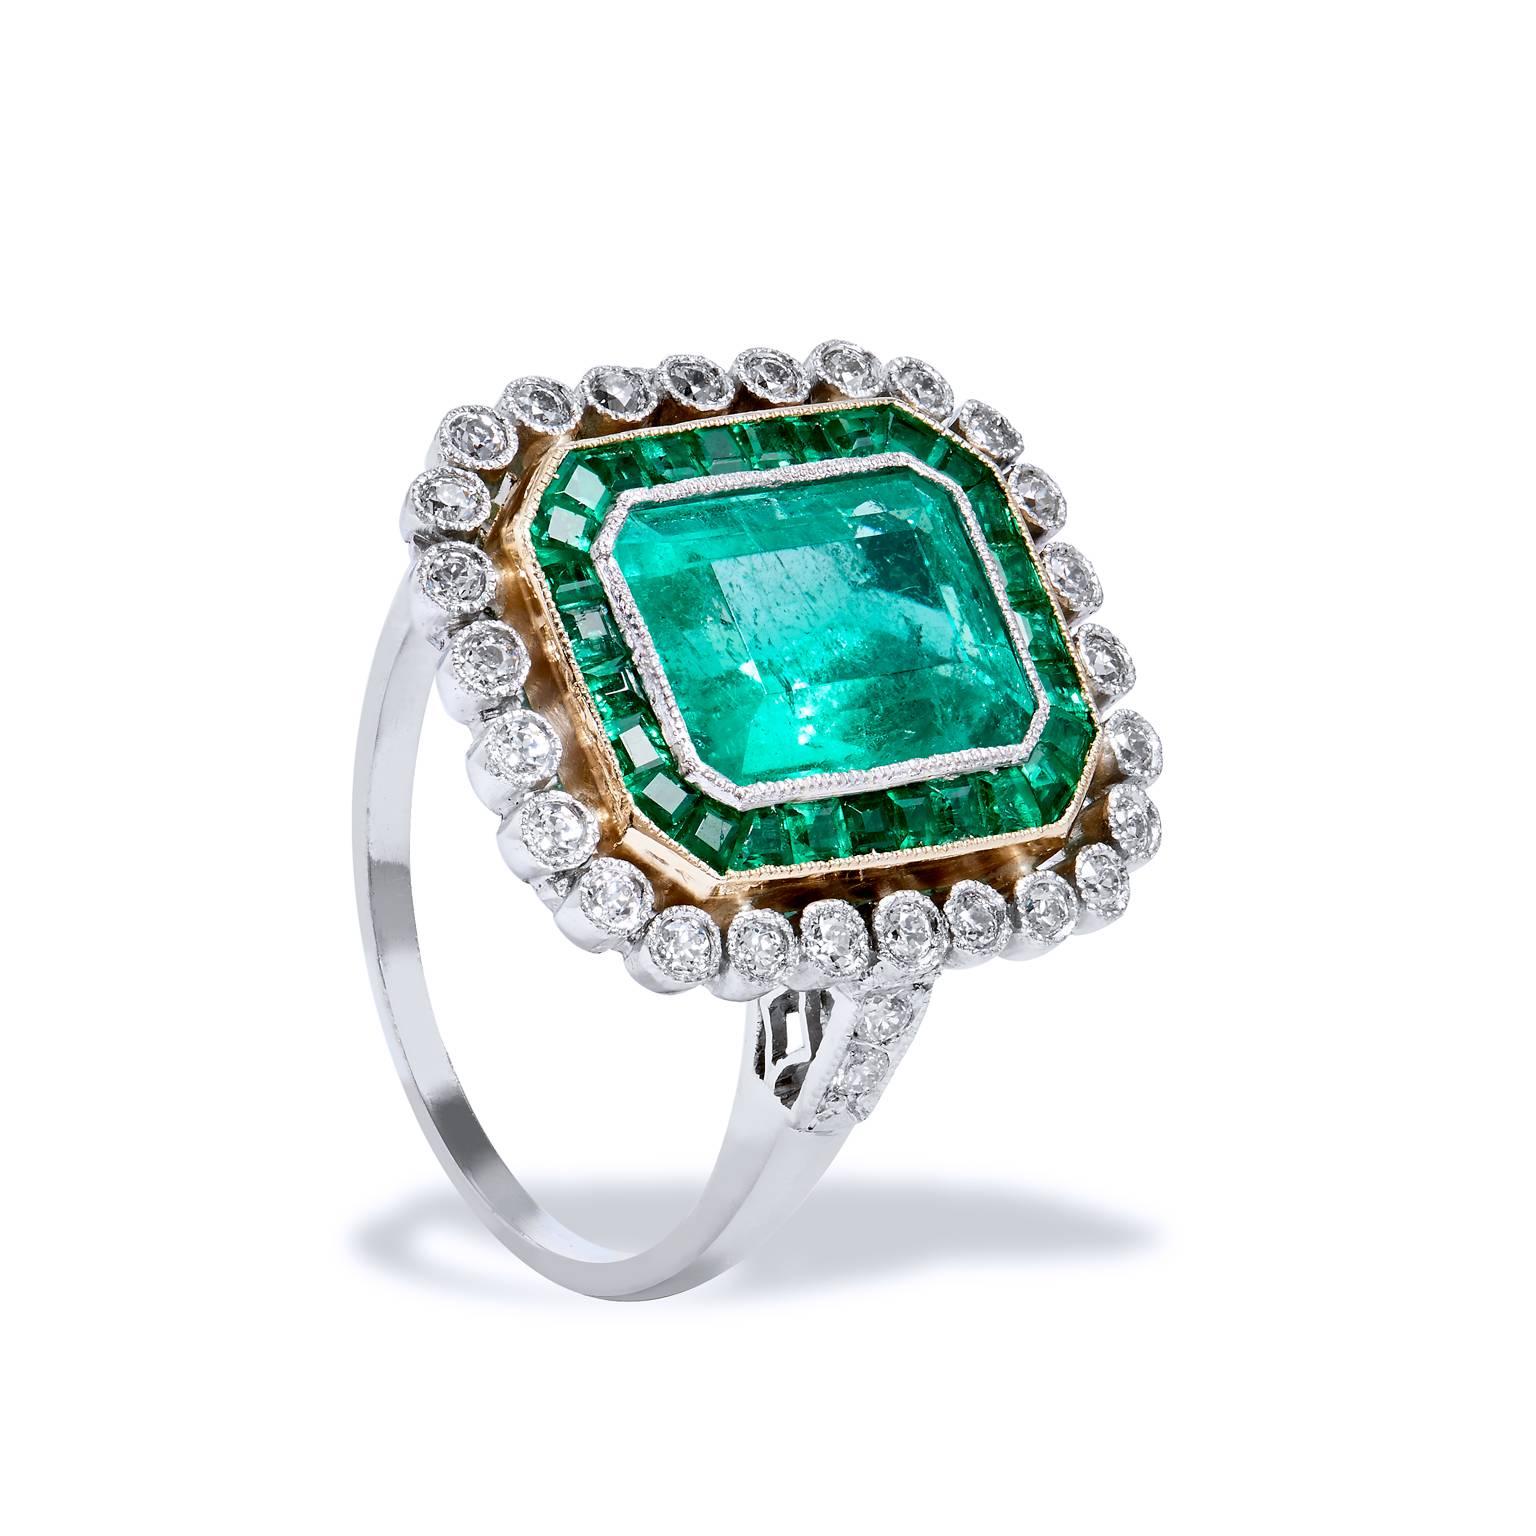 Channeling  the glamour and sophistication of Great Gatsby, this divine ring captures one’s attention with an impressive 2.75ct Colombian Emerald center gemstone.  Crafted in platinum with a soft touch of 18kt yellow gold that finely defines a